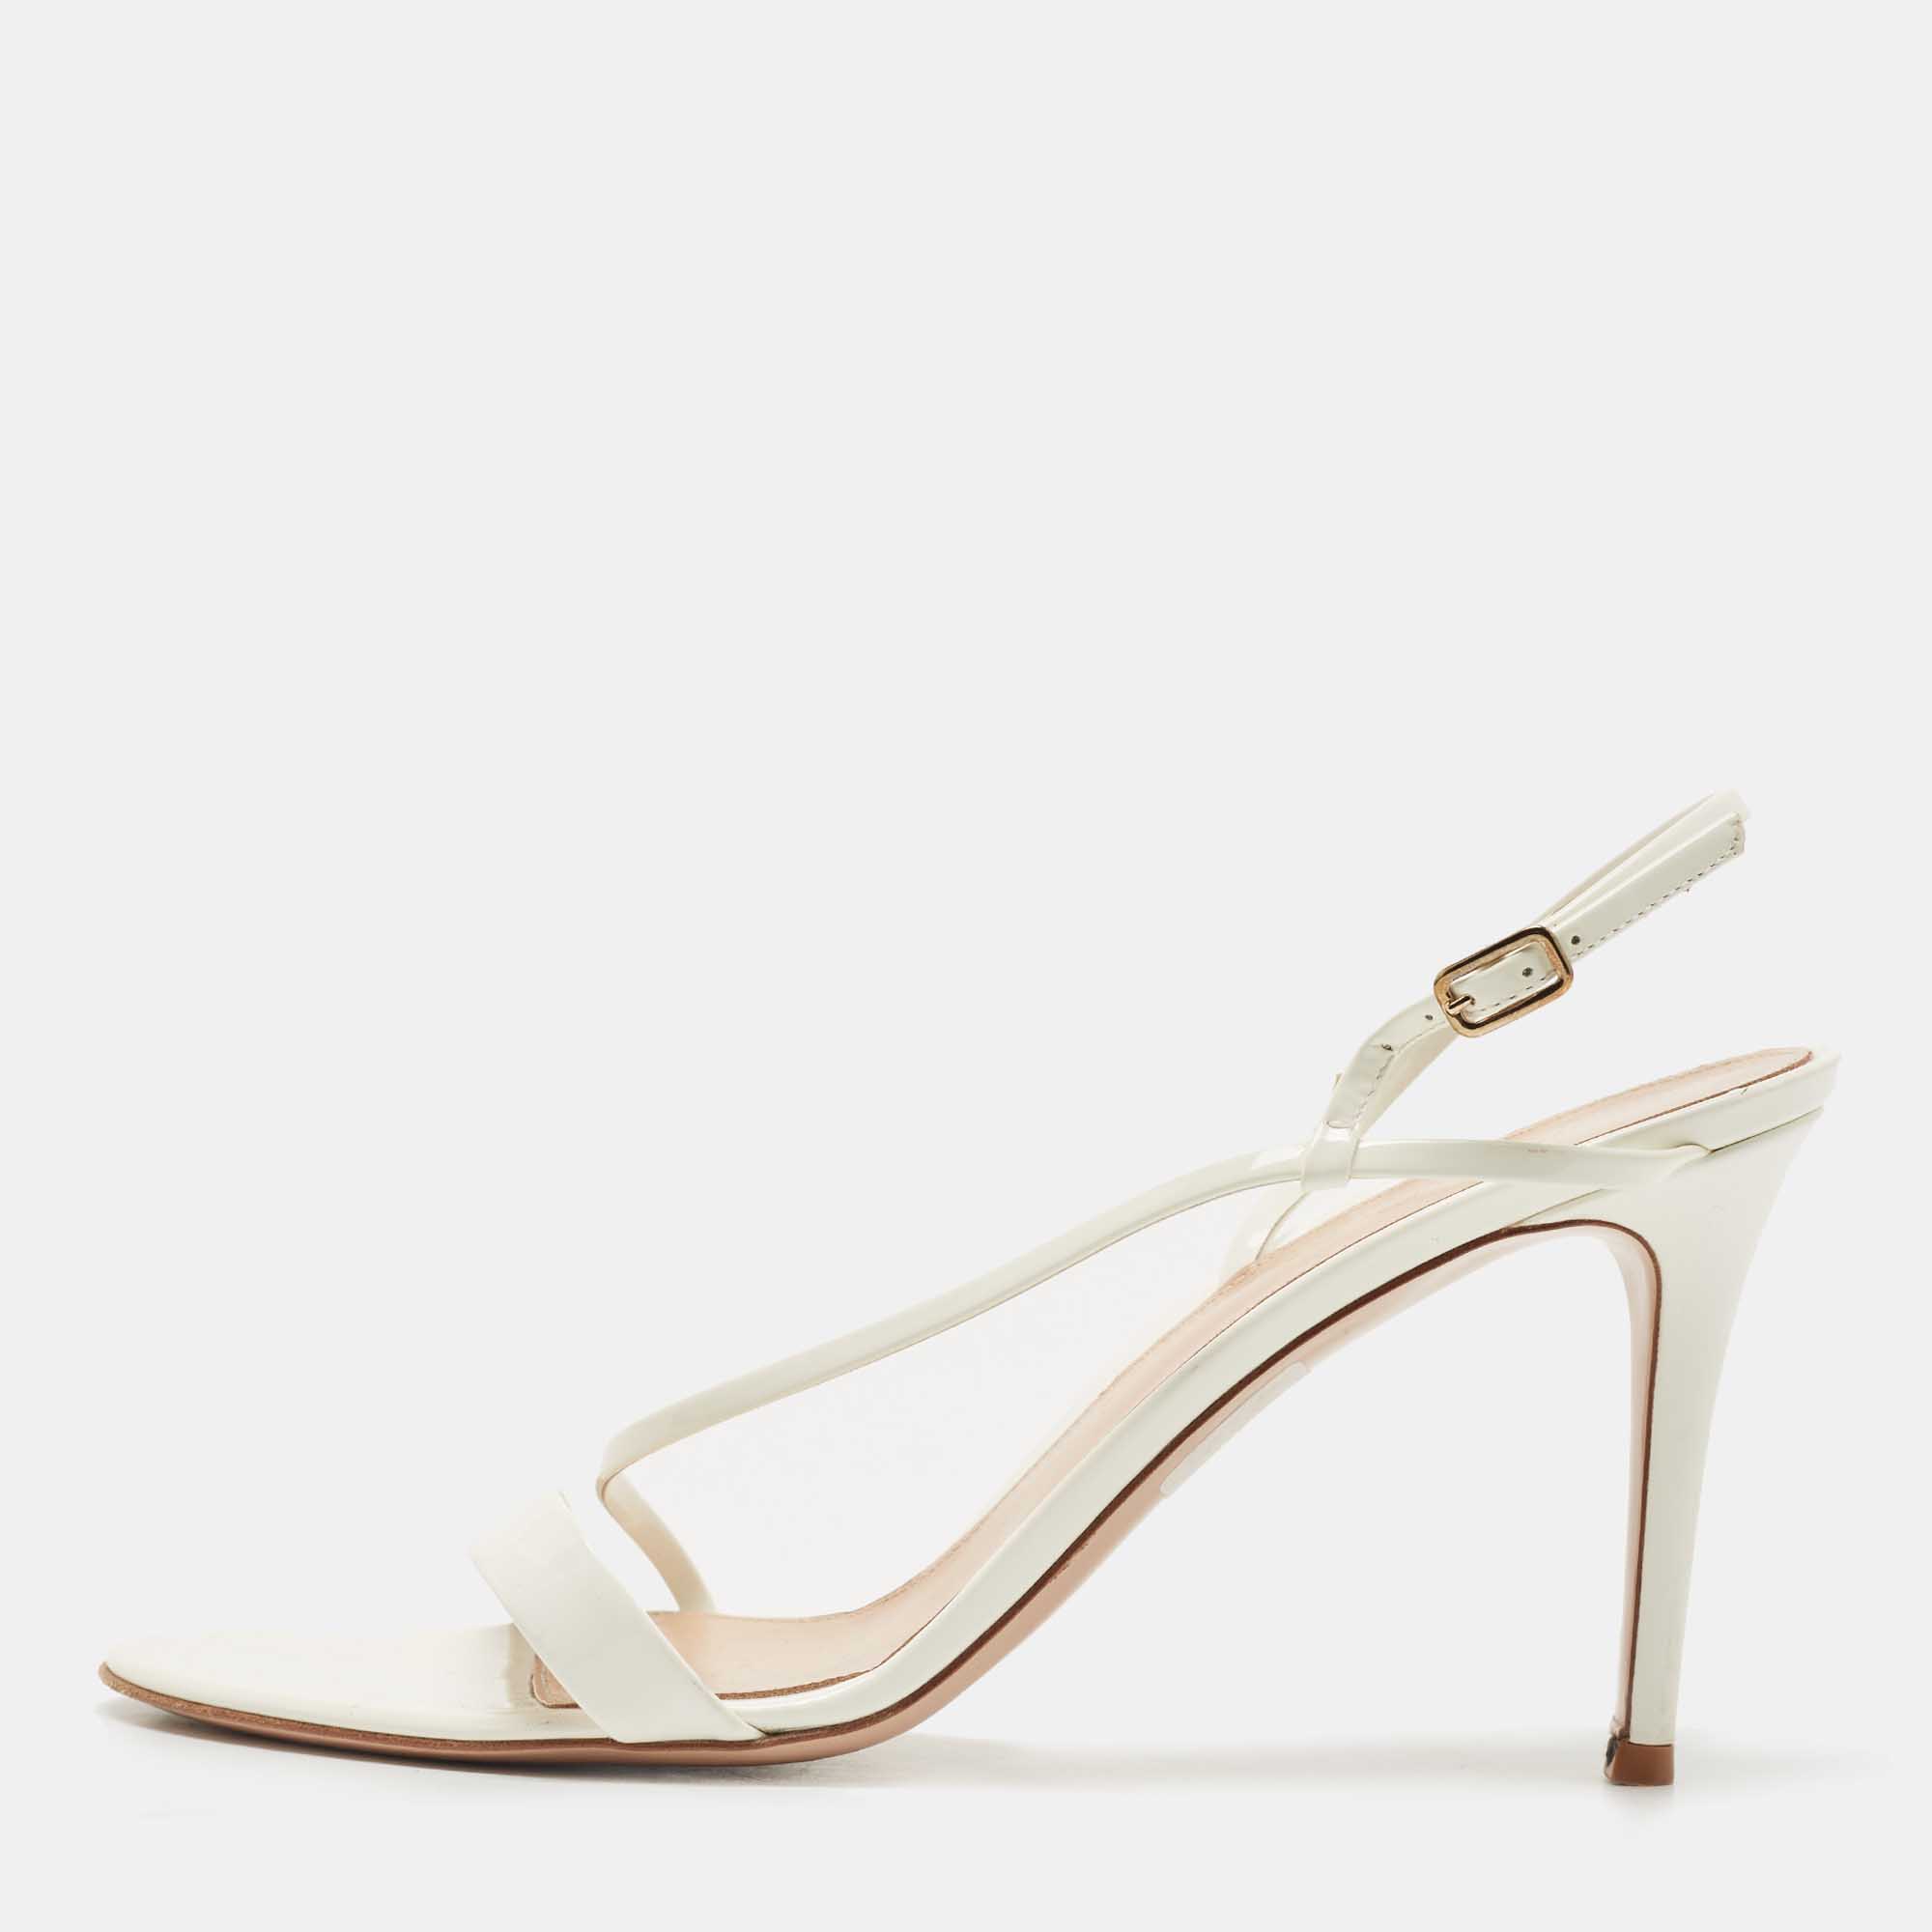 Gianvito Rossi White Patent Leather Ankle Strap Sandals Size 41